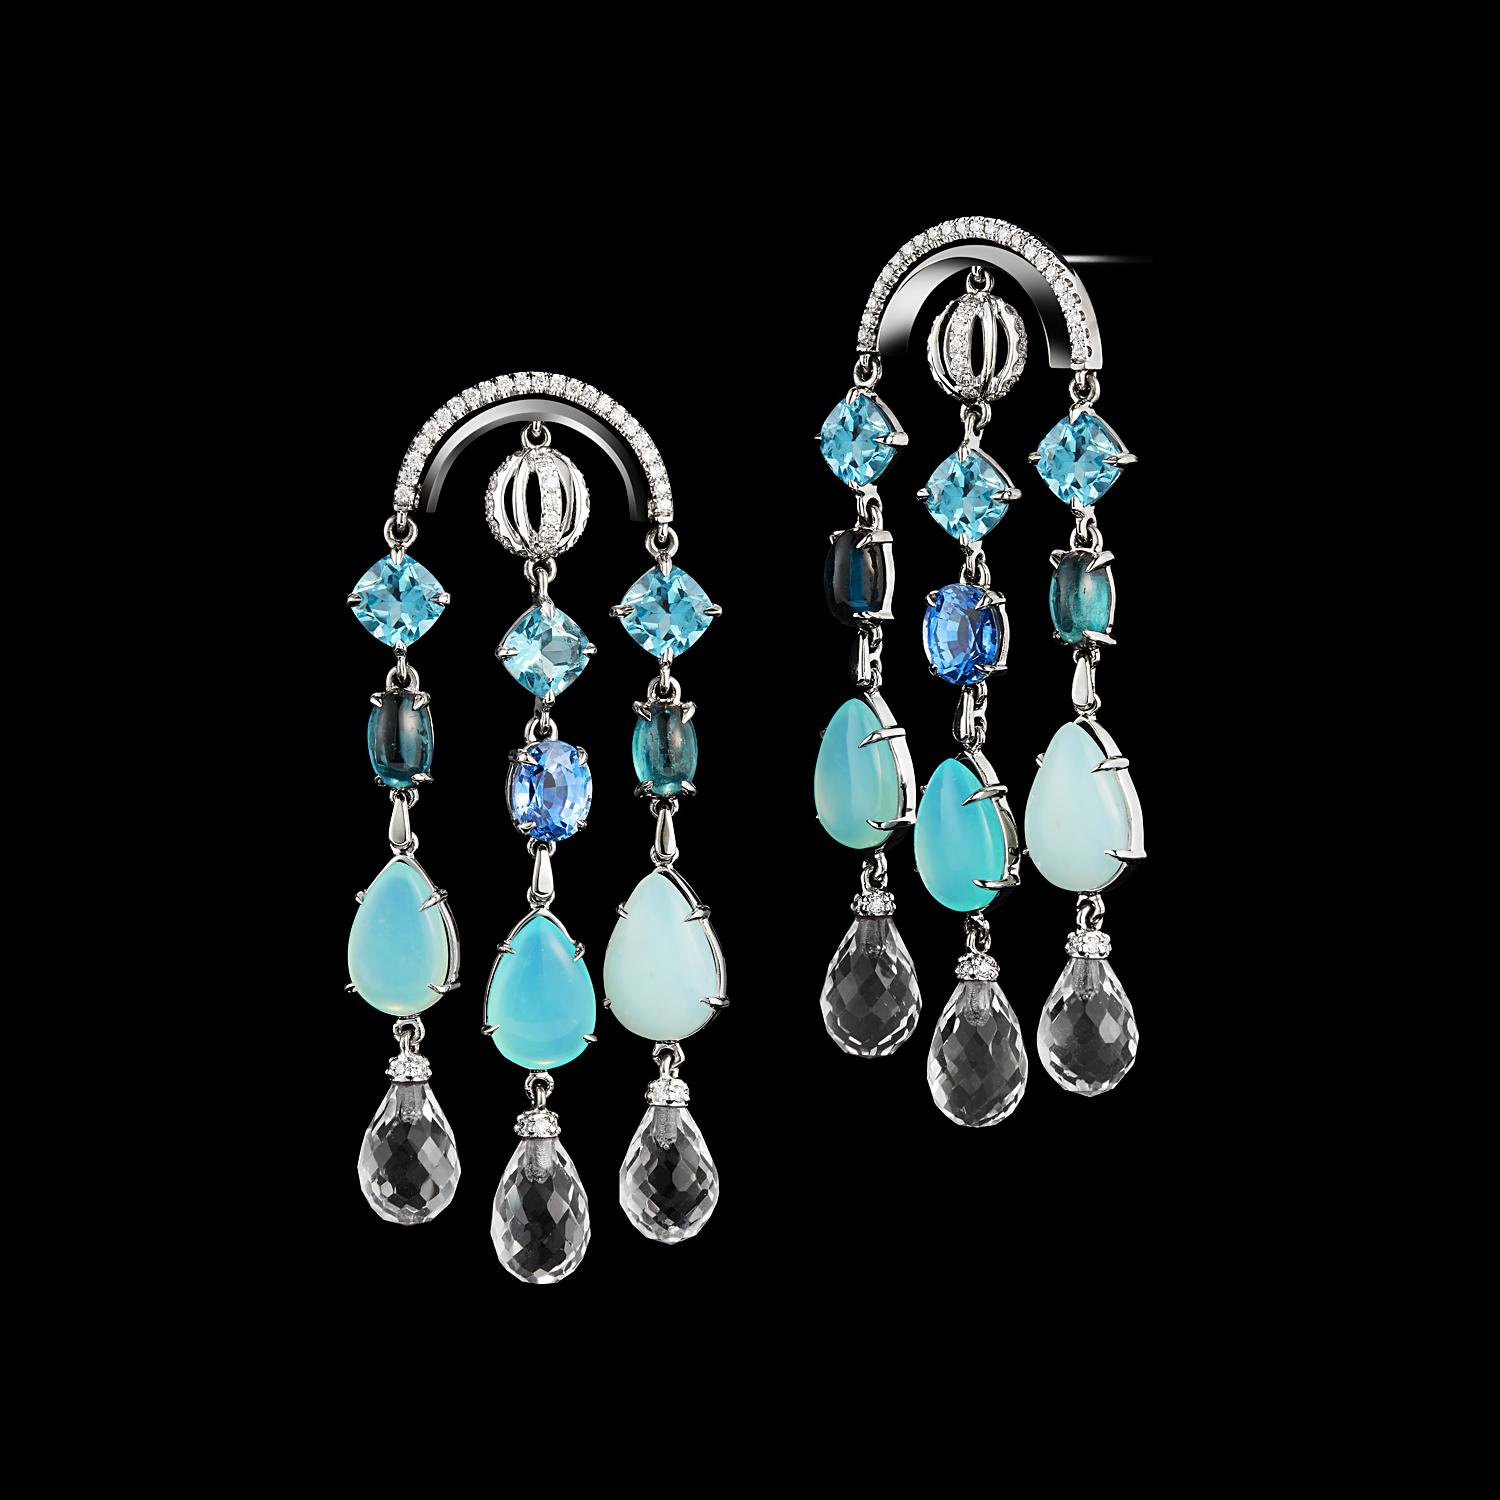 *Please contact us for more information on this piece or on creating your own Alexandra Mor custom Design. 

A pair of one-of-a-kind Alexandra Mor Sautoir Arched Earrings featuring Diamonds & Precious Stones with a mix of 6 Cushion Cut Blue Topaz